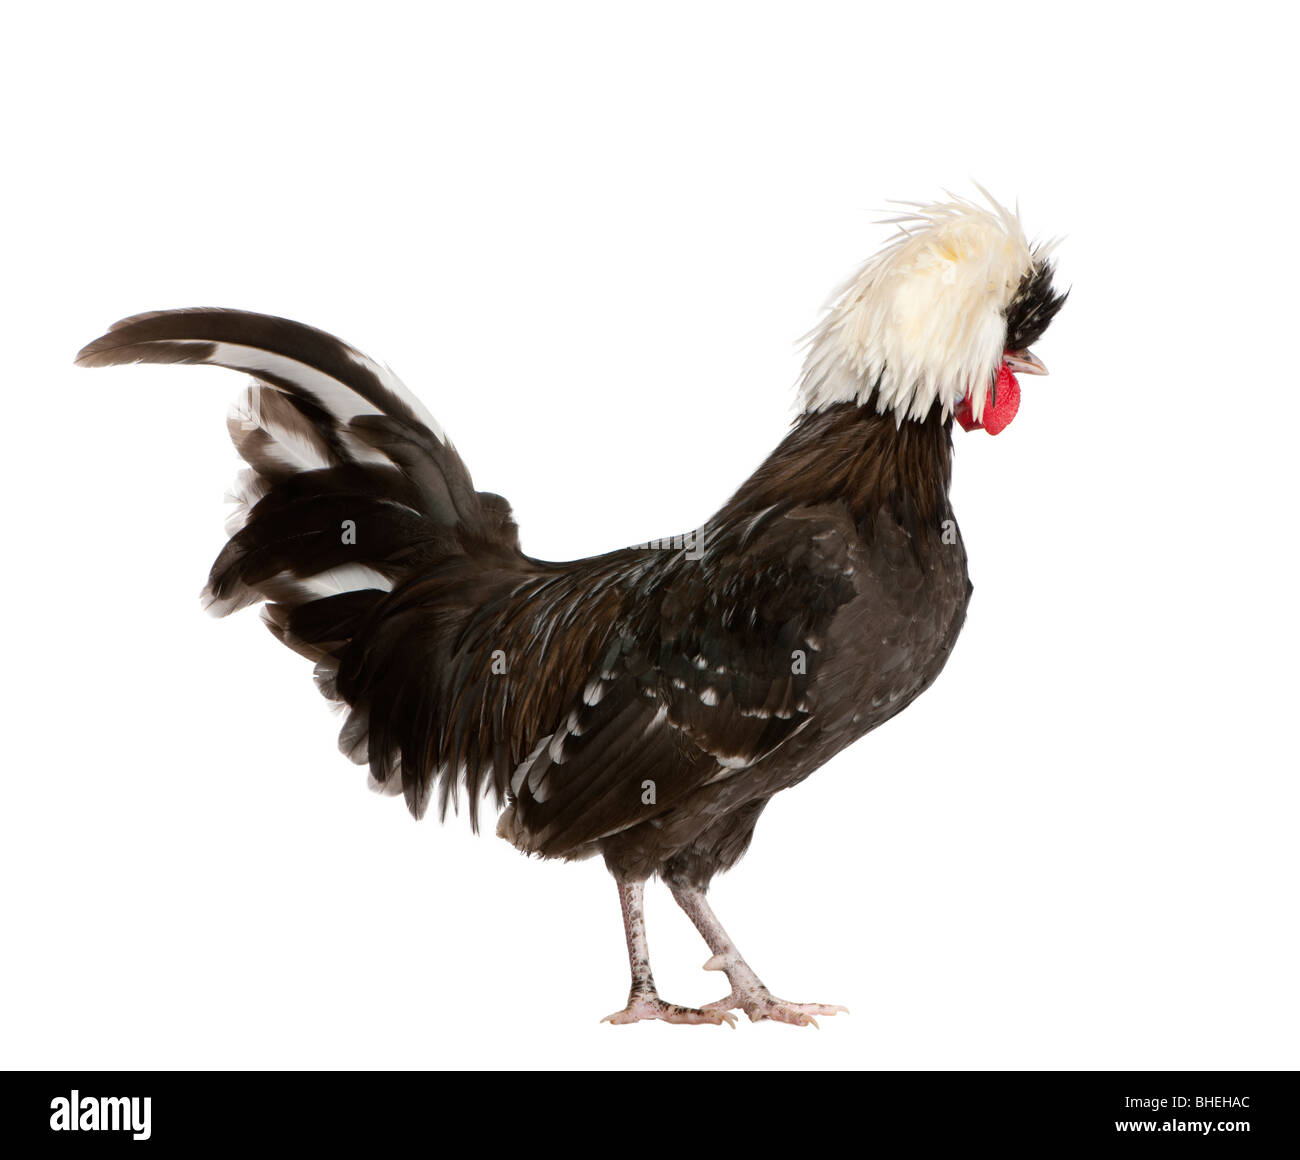 Holland dwarf rooster white-crested chicken, 5 months old, standing in front of white background Stock Photo